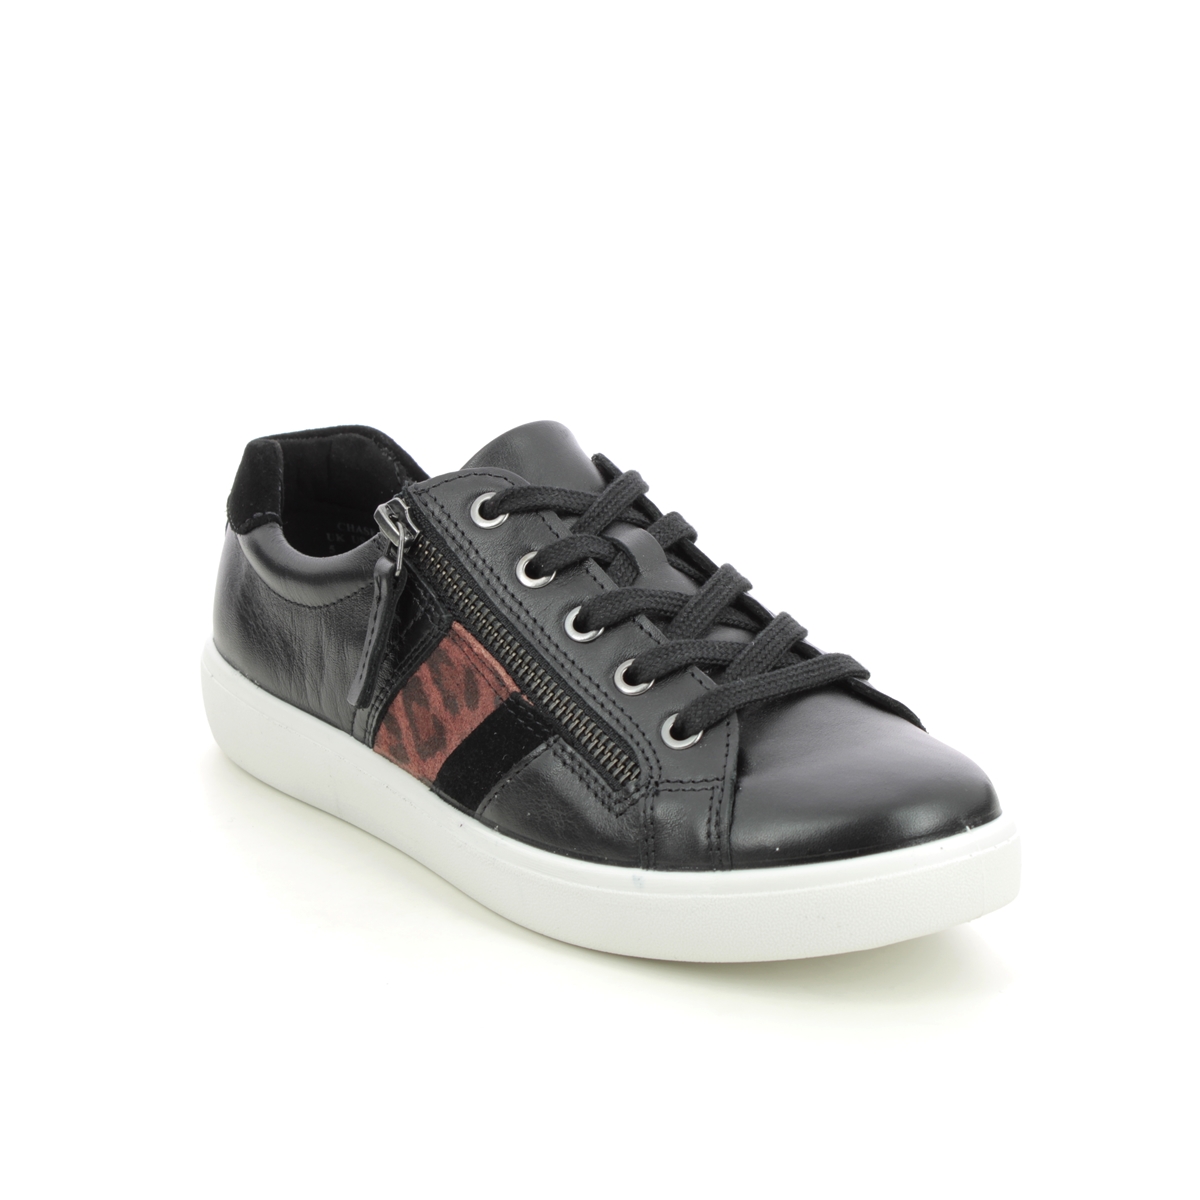 Hotter Chase 2 Wide Black leather Womens trainers 16113-31 in a Plain Leather in Size 4.5